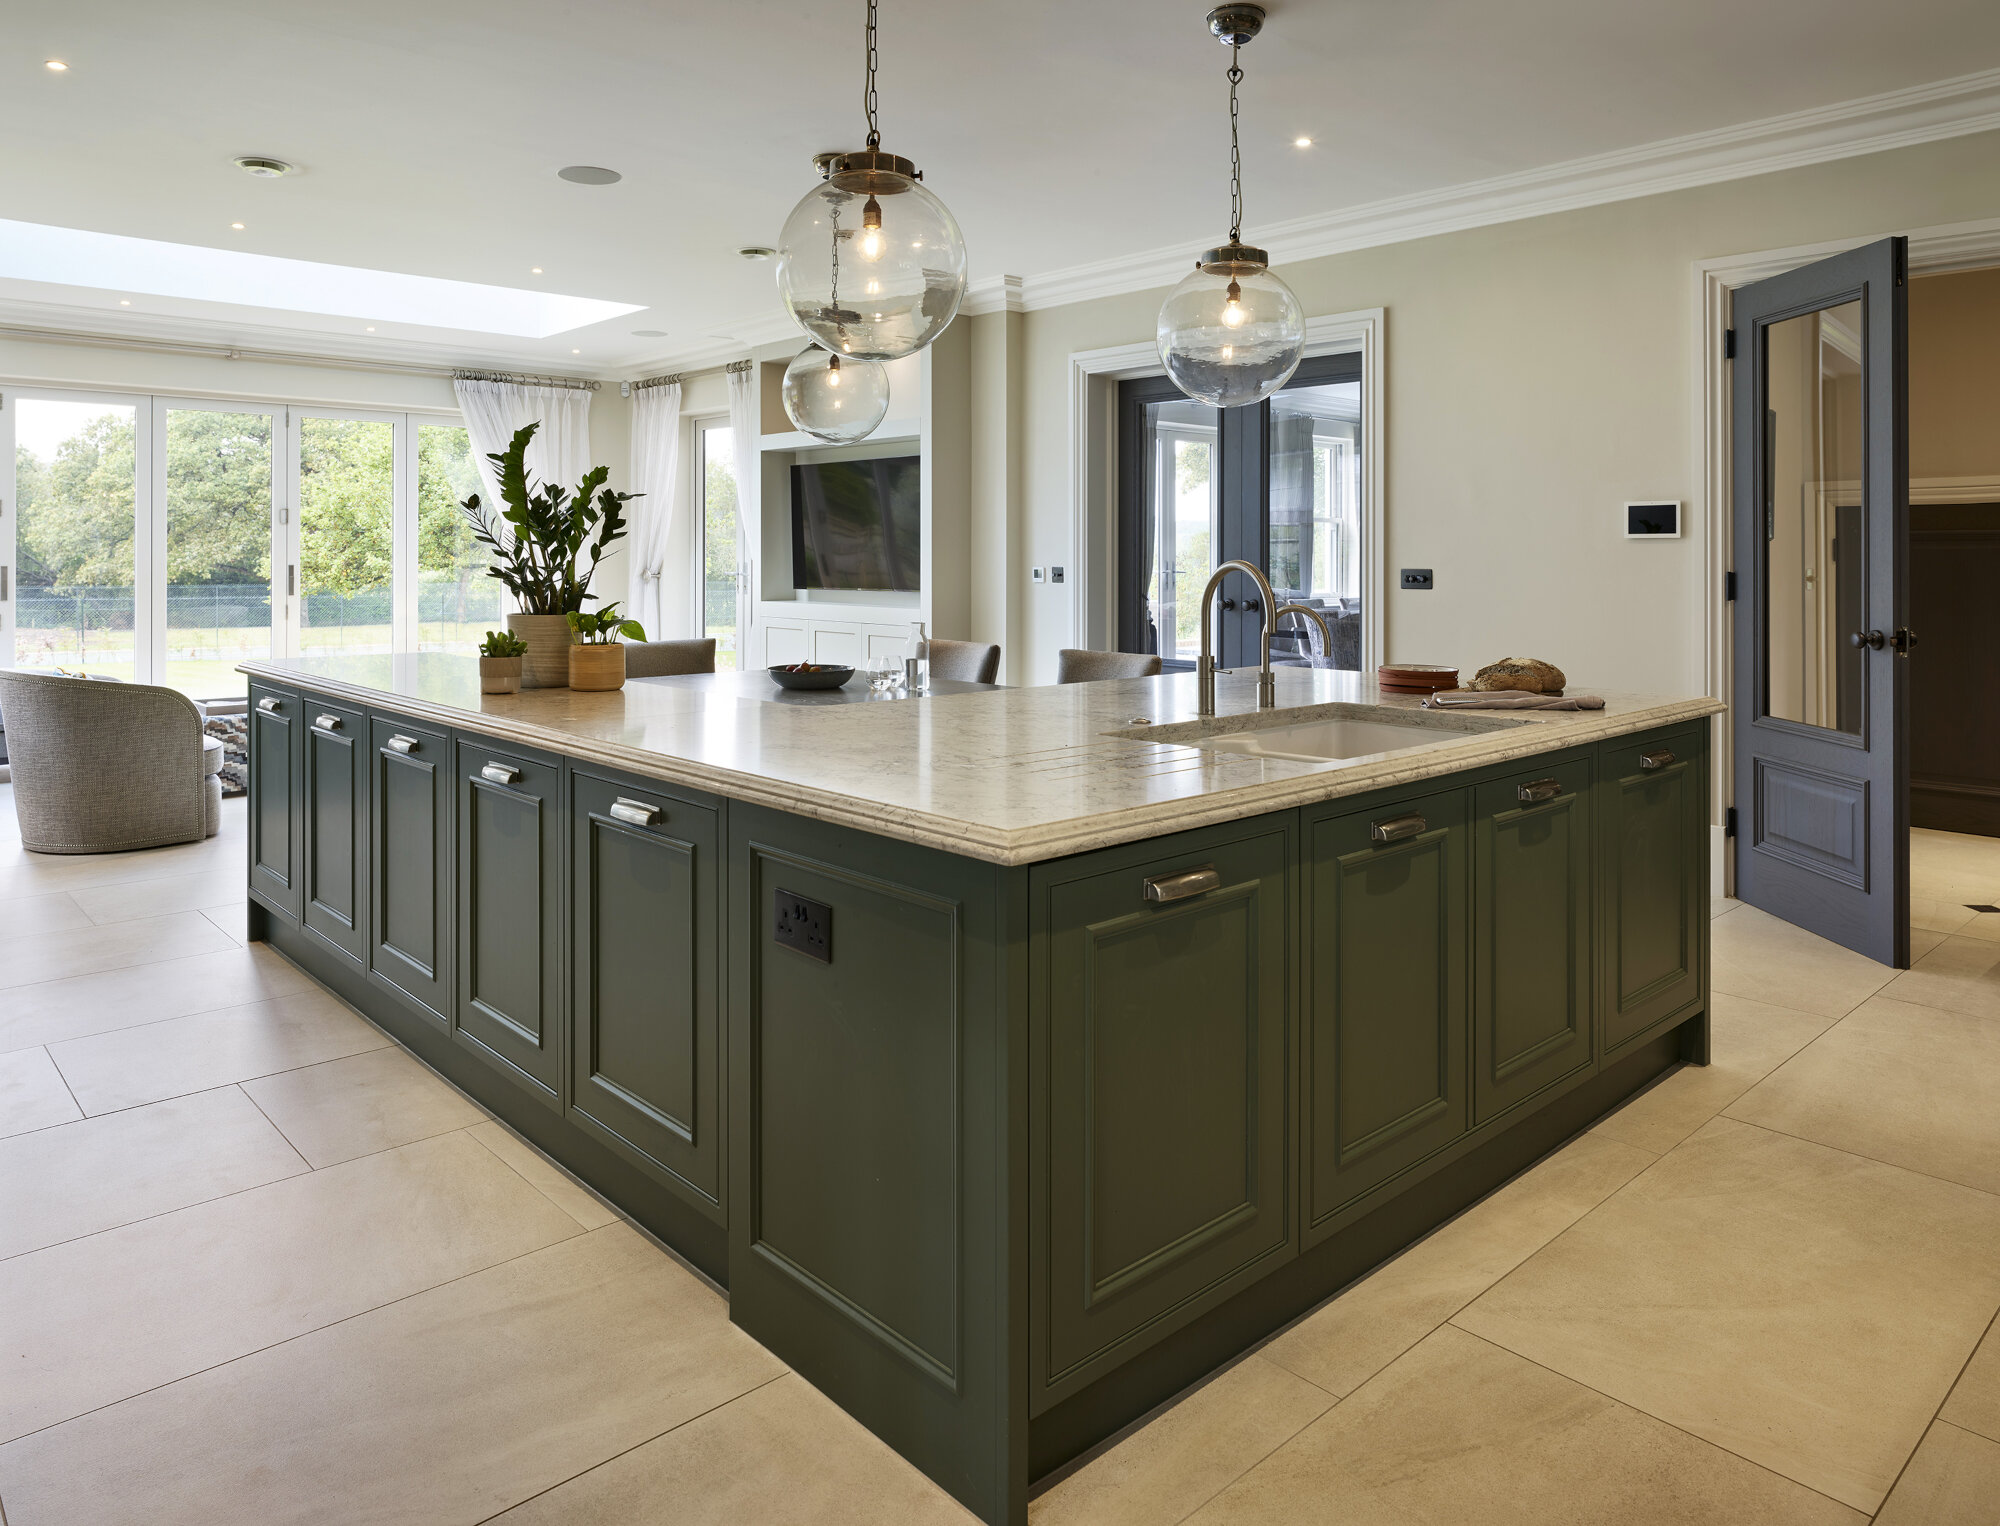 High End traditional Kitchens In Brigg